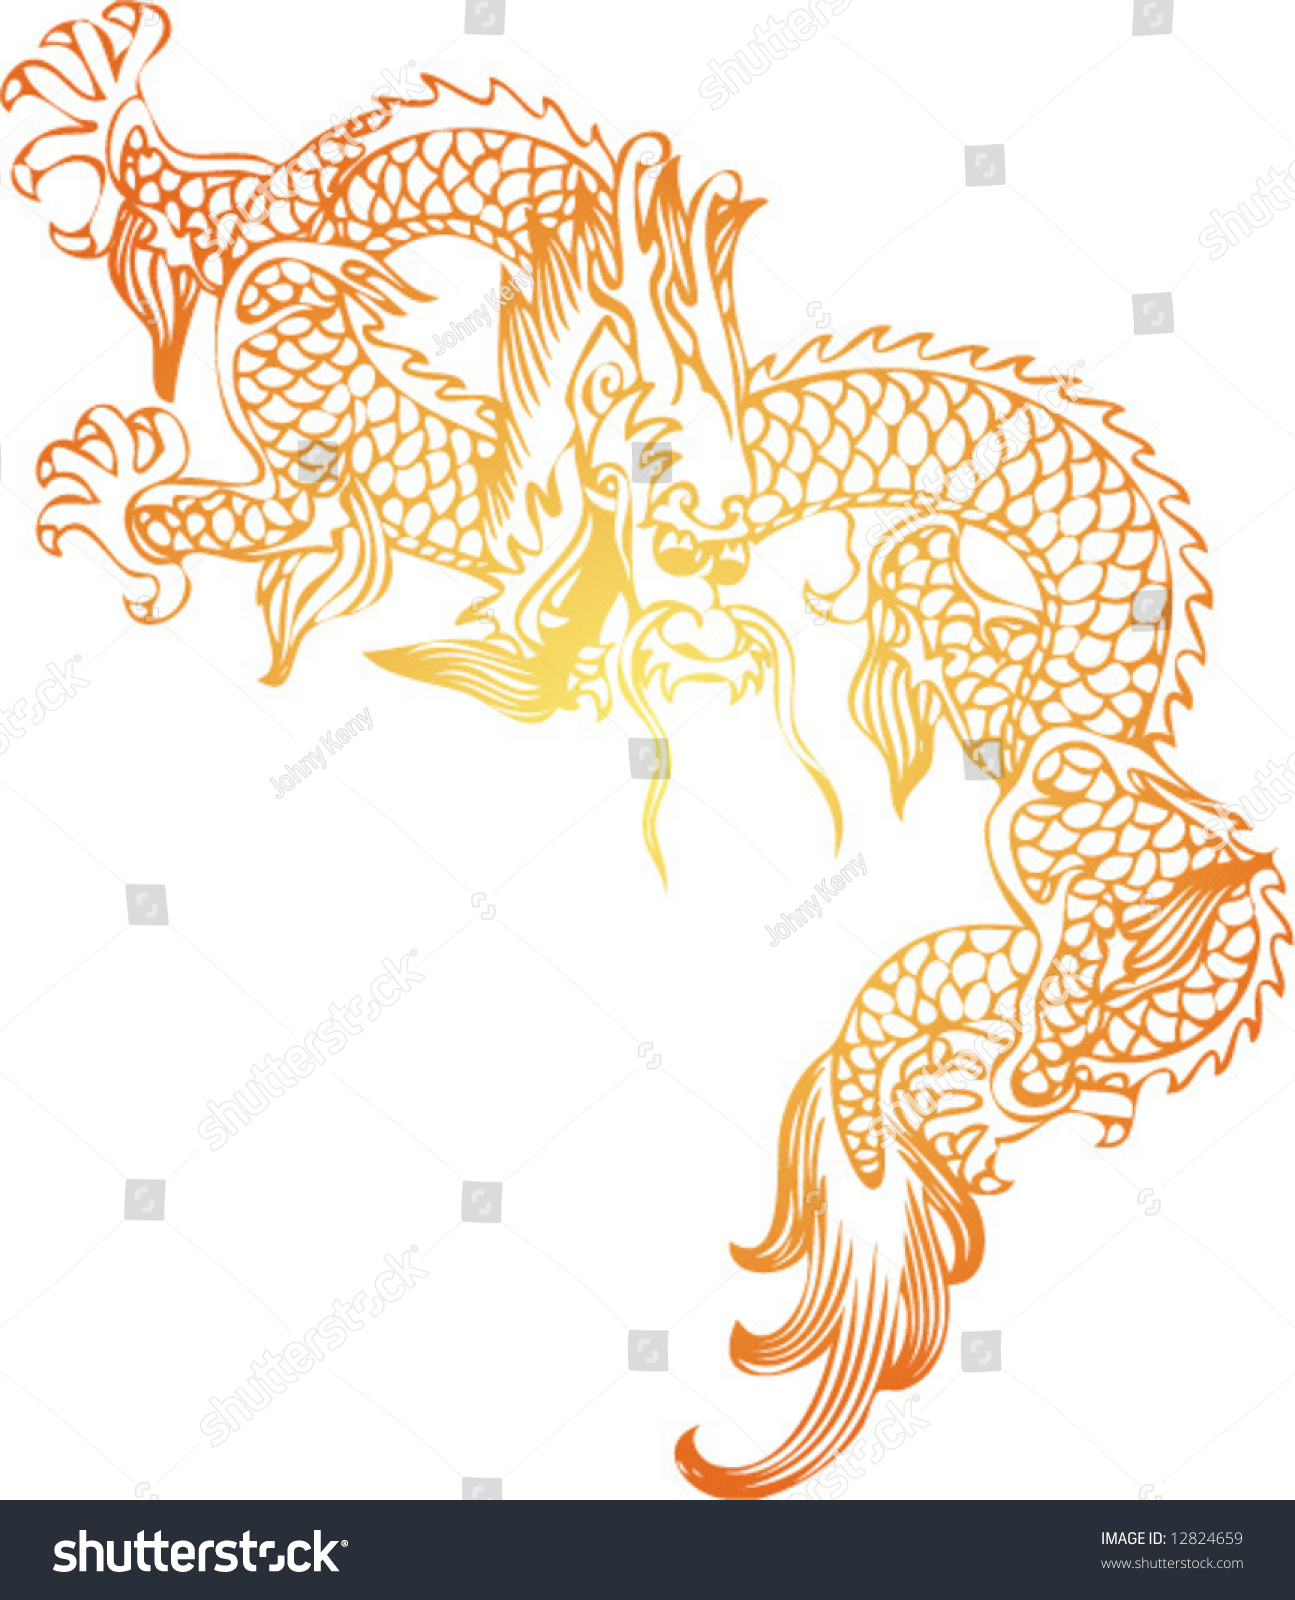 Chinese Traditional Decorative Dragon Stock Vector 12824659 : Shutterstock